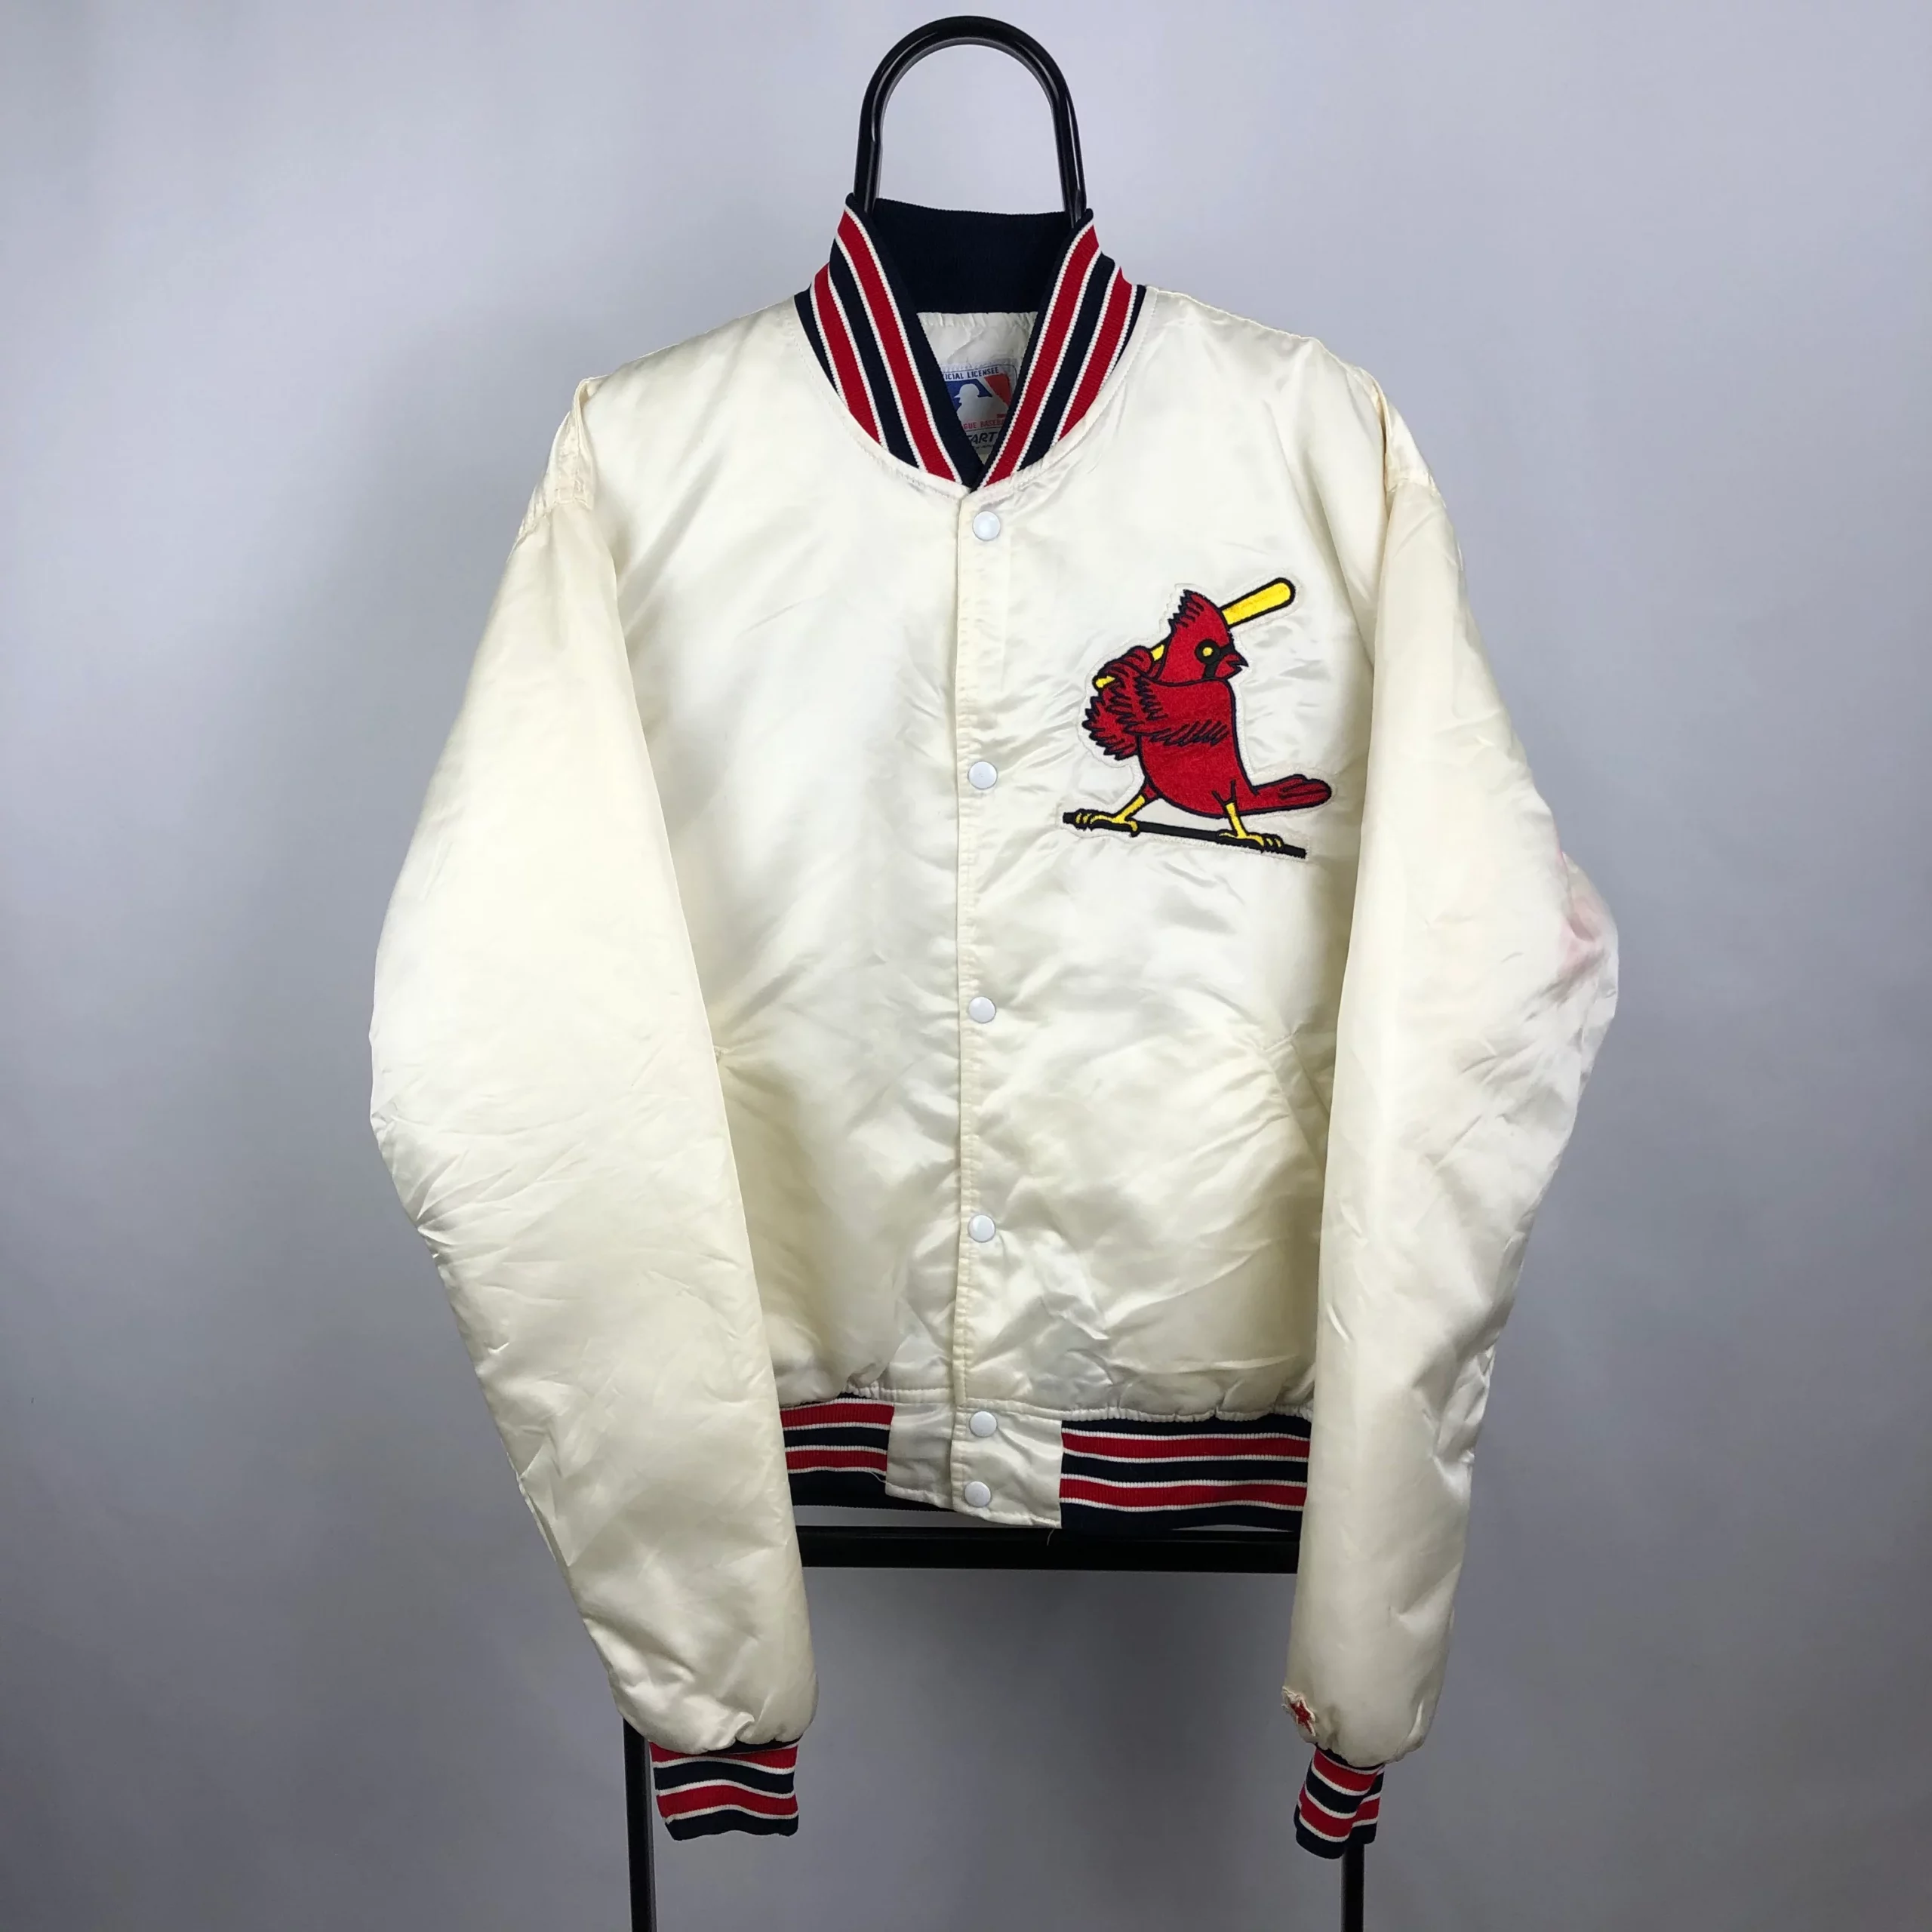 Vintage 90's St. Louis Cardinals Baseball Coaches Red Satin